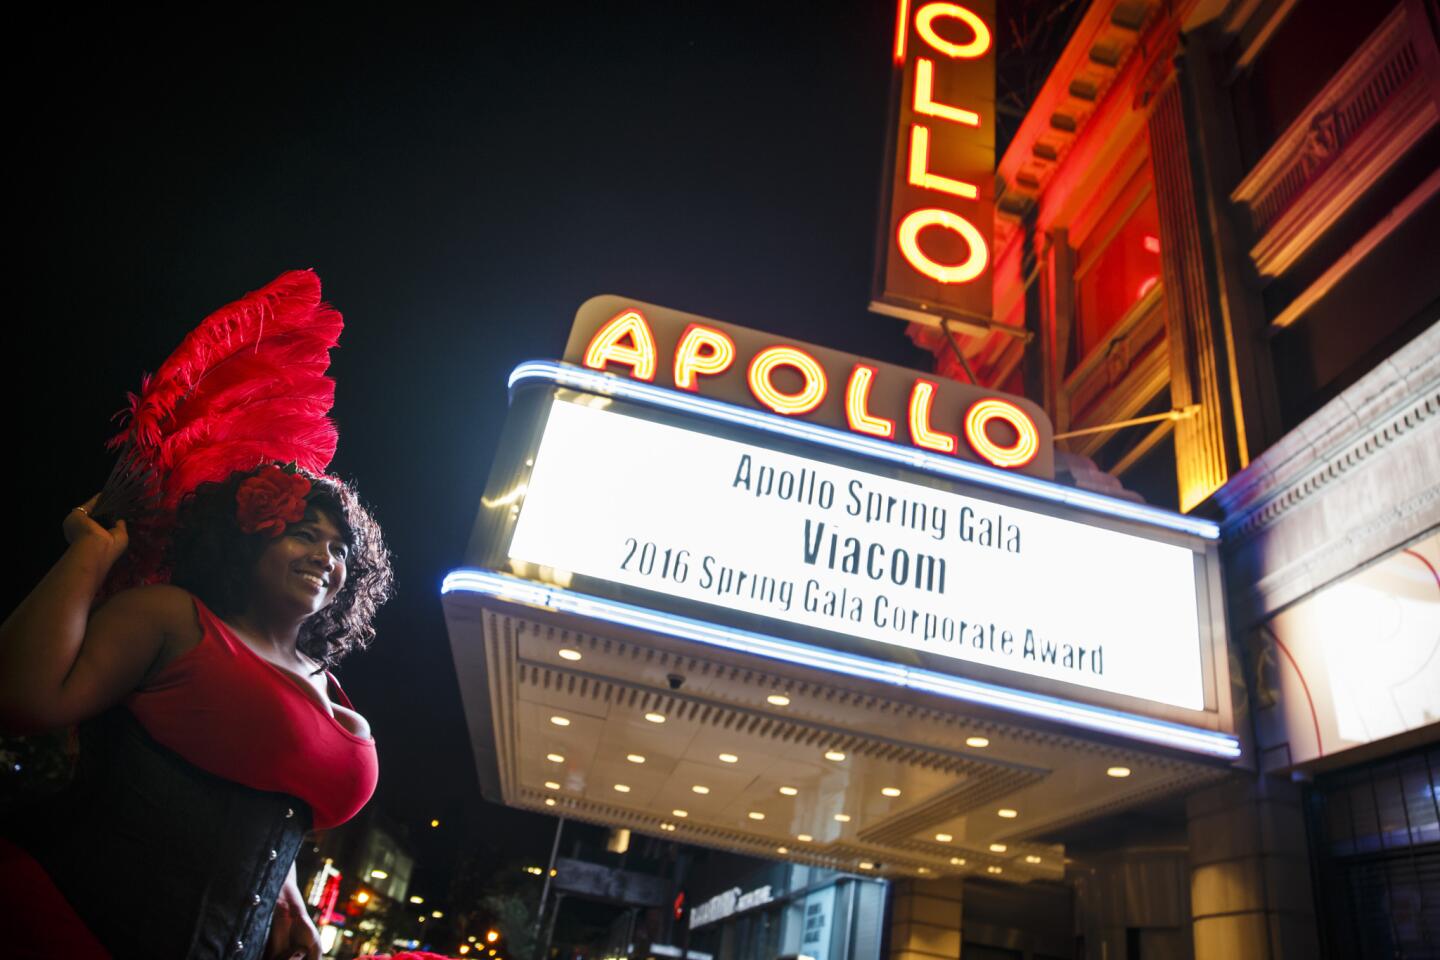 Amanda Humes pauses outside the famed Apollo Theater in Harlem.